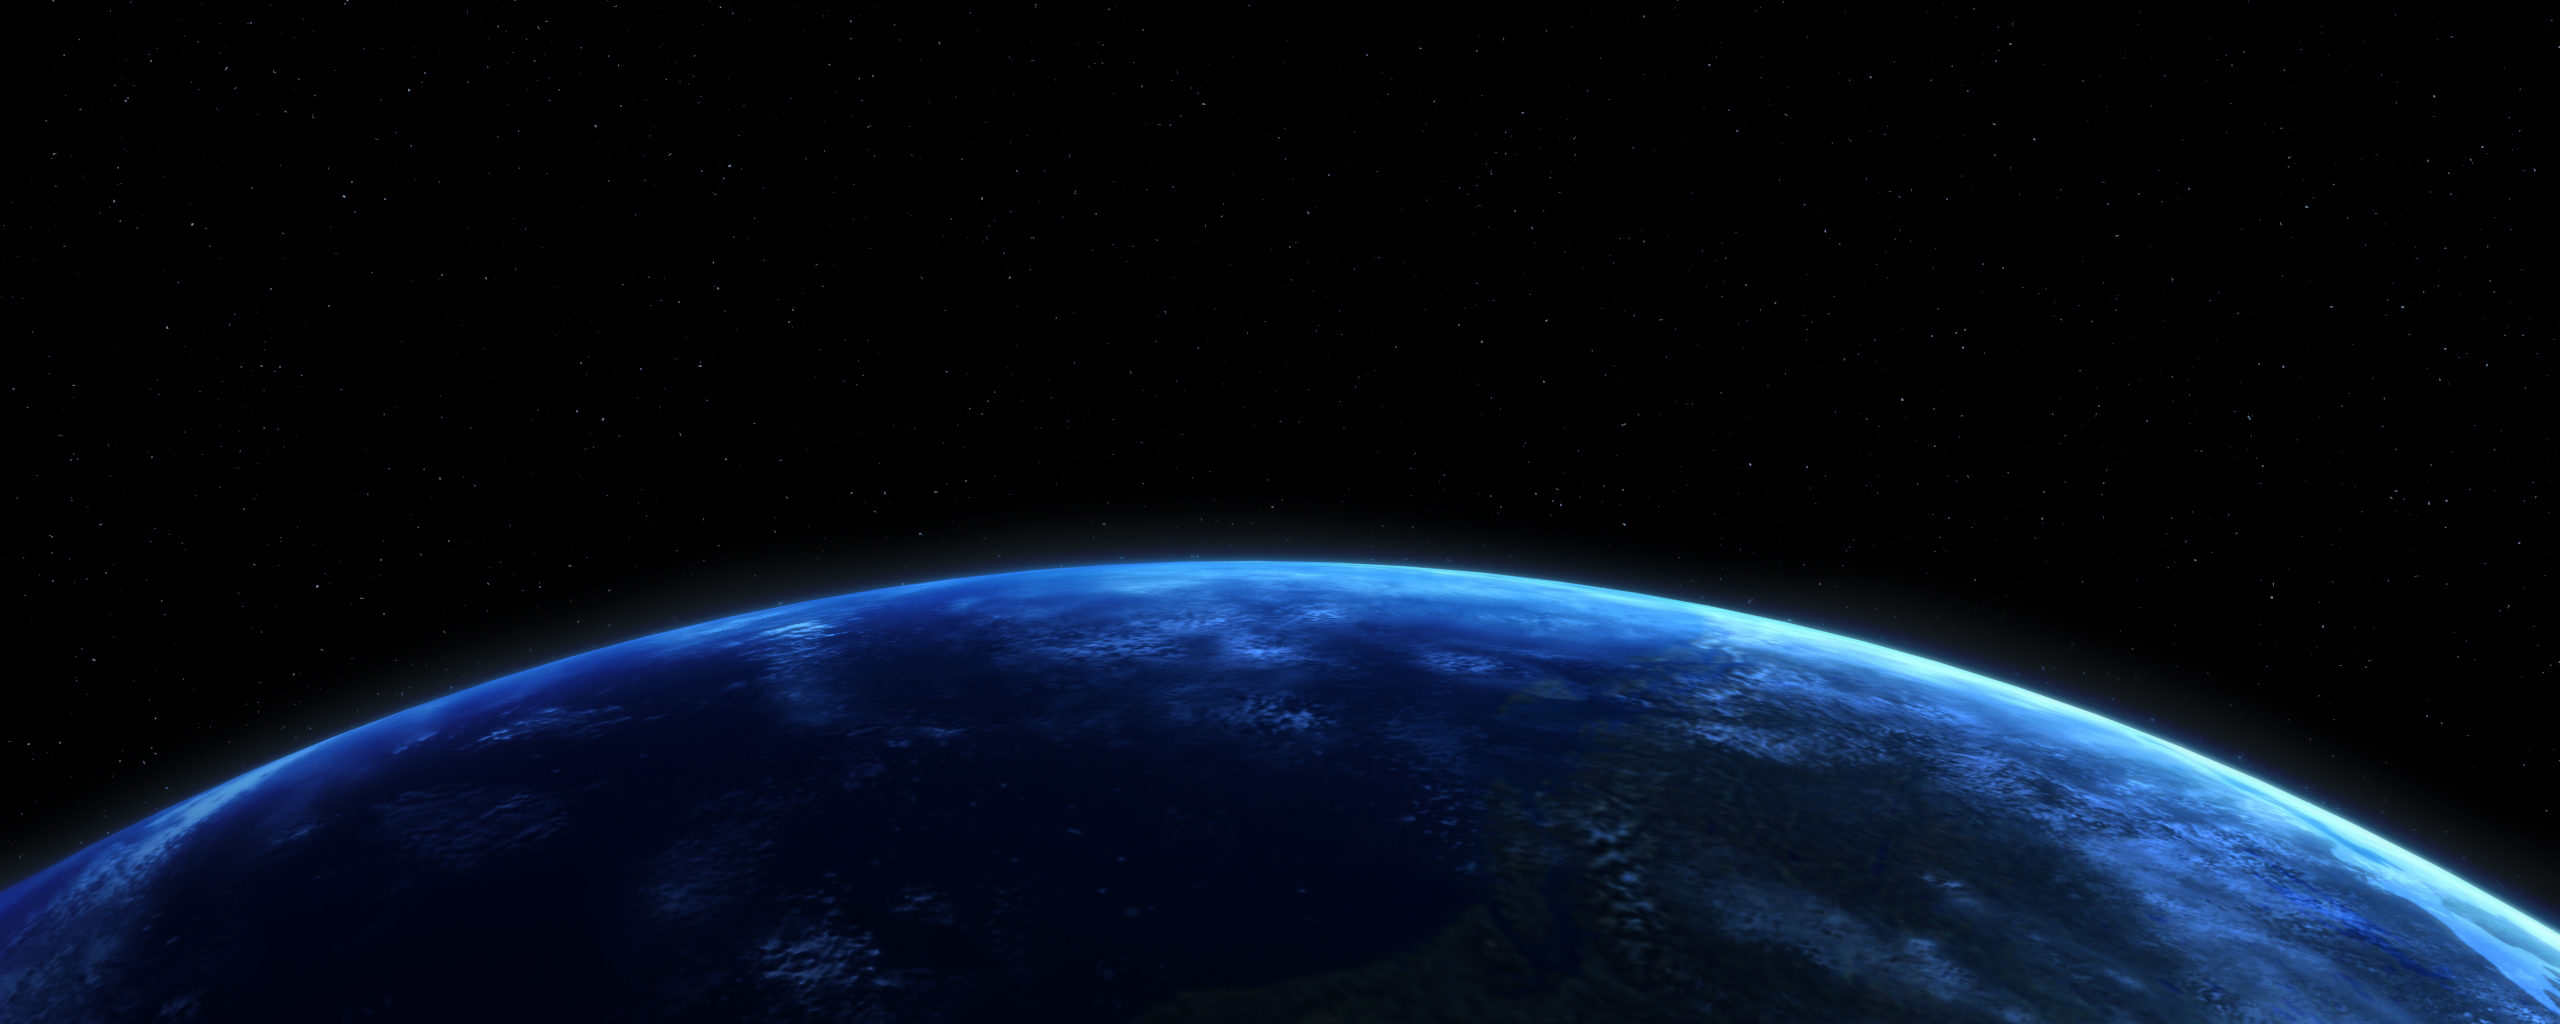 Halfcloseup of the earth from space in the dark 4K wallpaper download